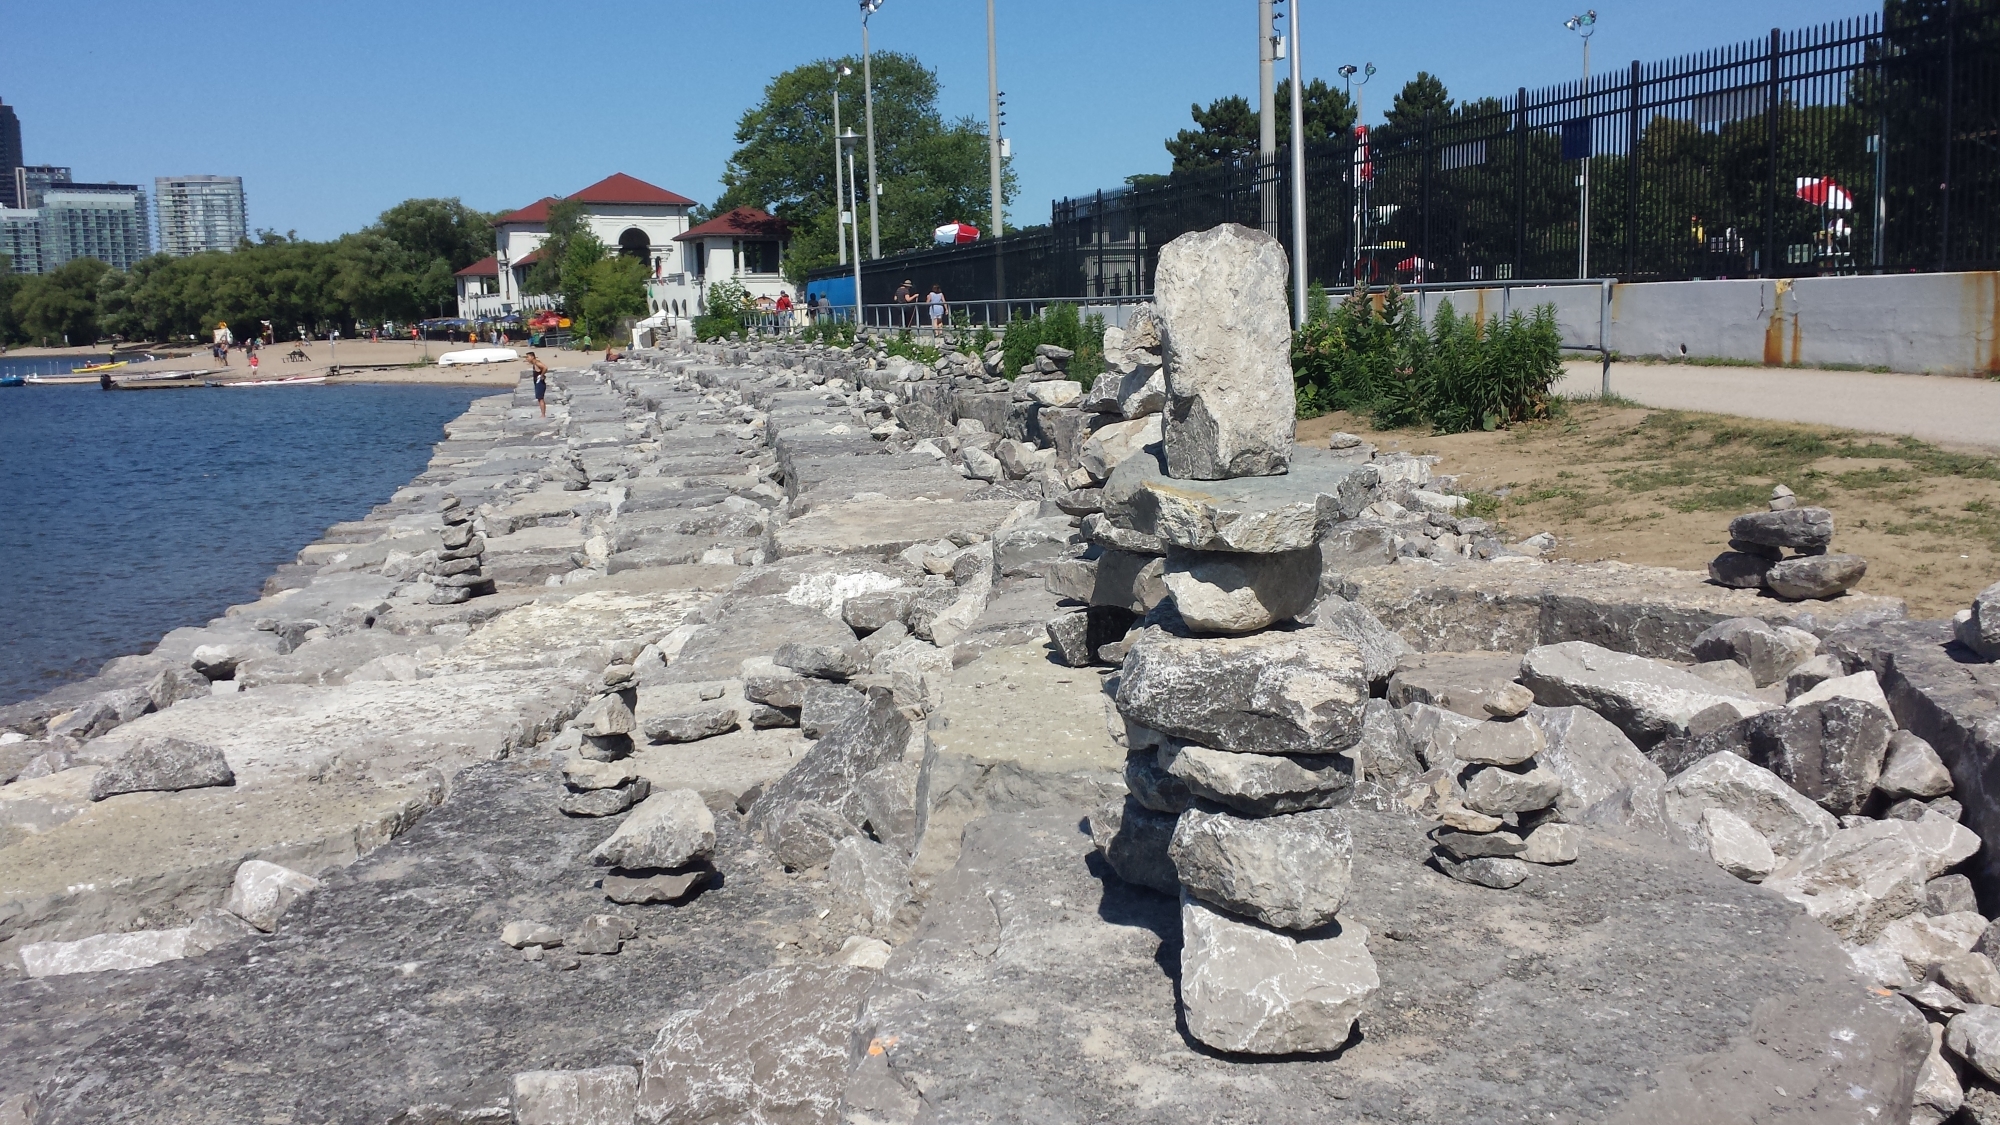 Long Row of Rock Sculptures by Sunnyside Pool - Toronto